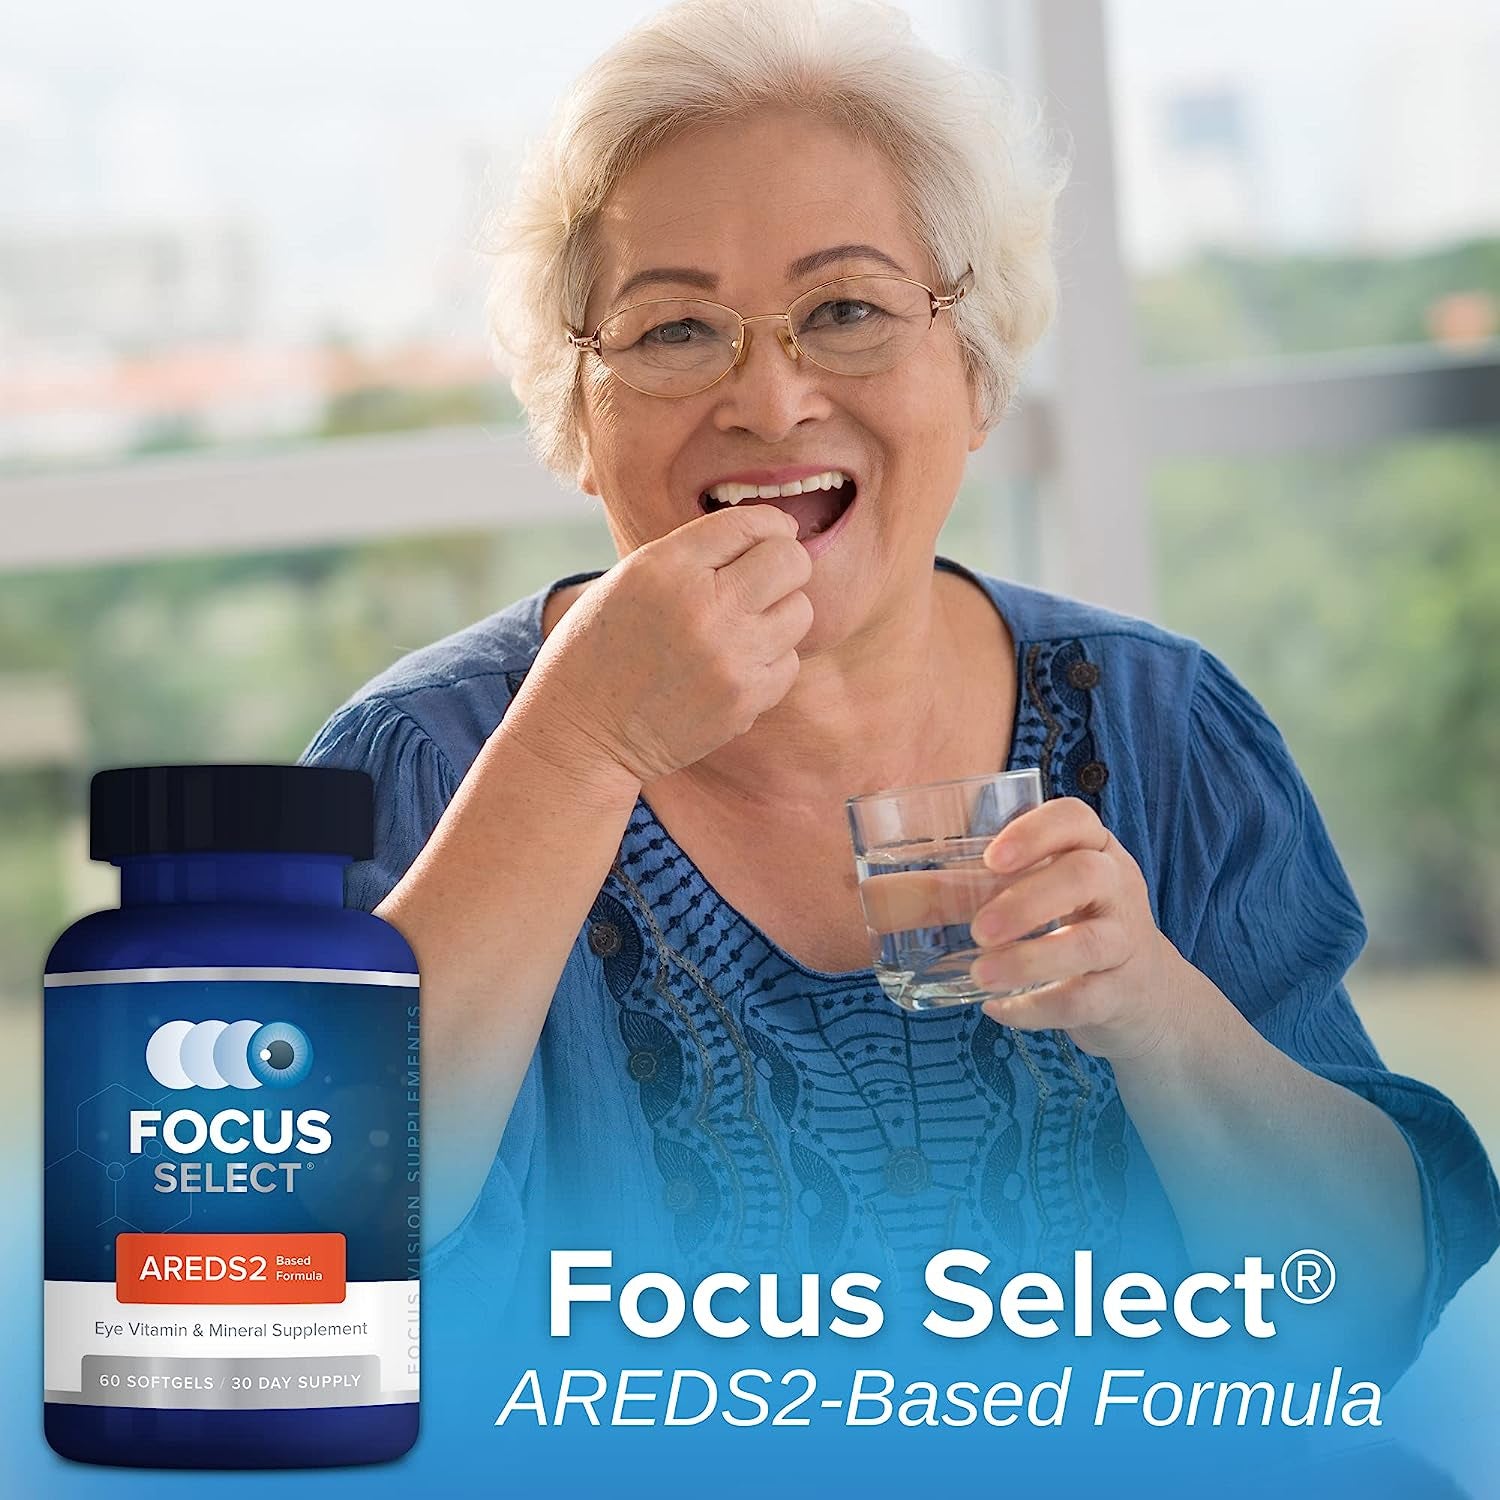 Focus Select? AREDS2 Based Eye Vitamin-Mineral Supplement - AREDS2 Based Supplement for Eyes (60 Ct. 30 Day Supply) - AREDS2 Based Low Zinc Formula - Eye Vision Supplement and Vitamin